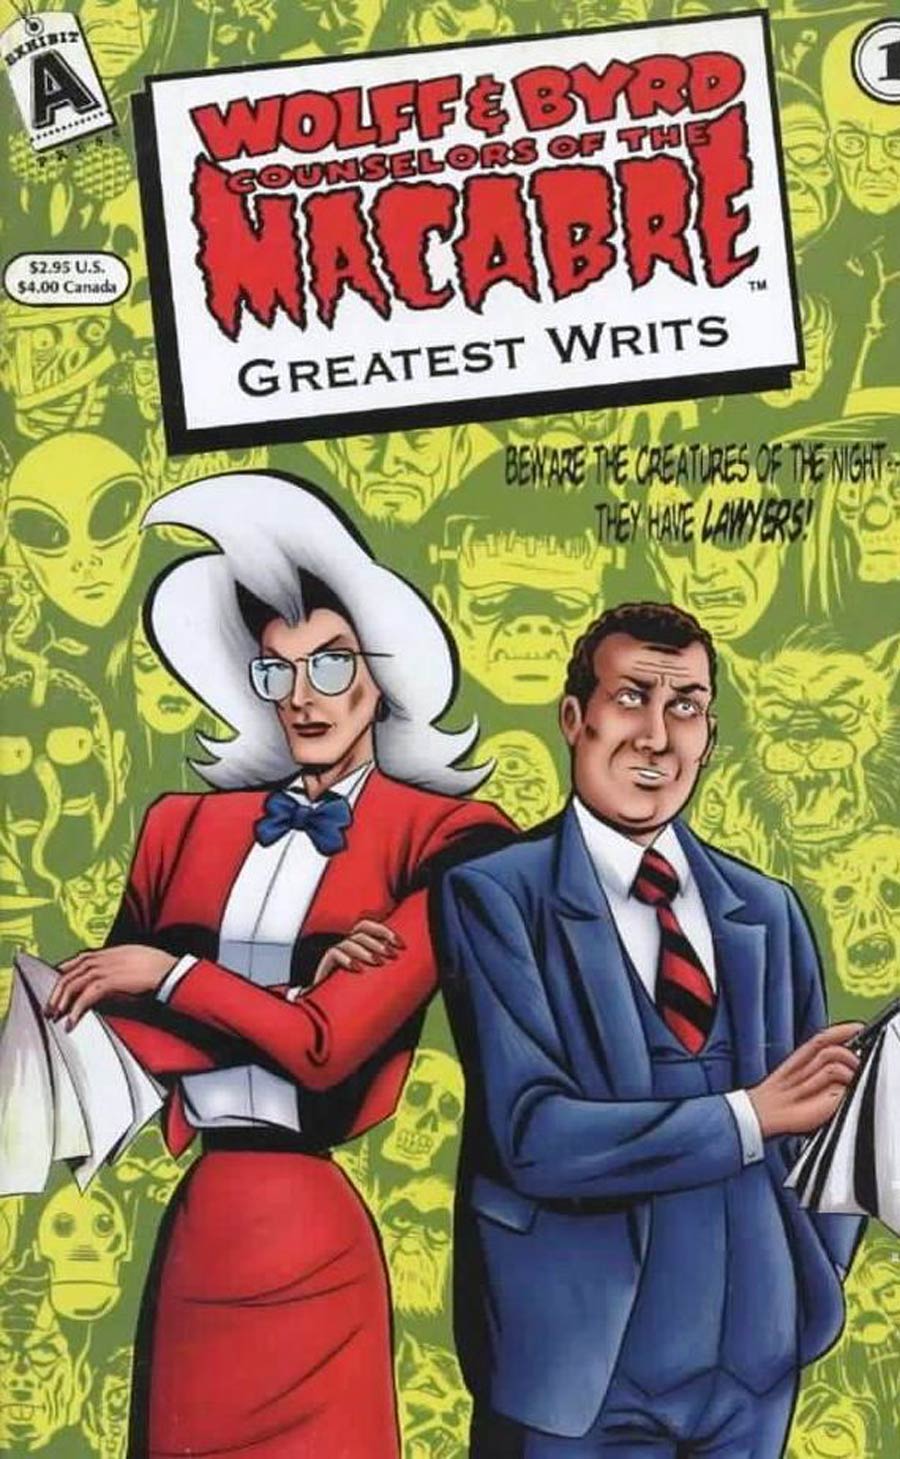 Wolff & Byrd Counselors Of The Macabre Greatest Writs #1